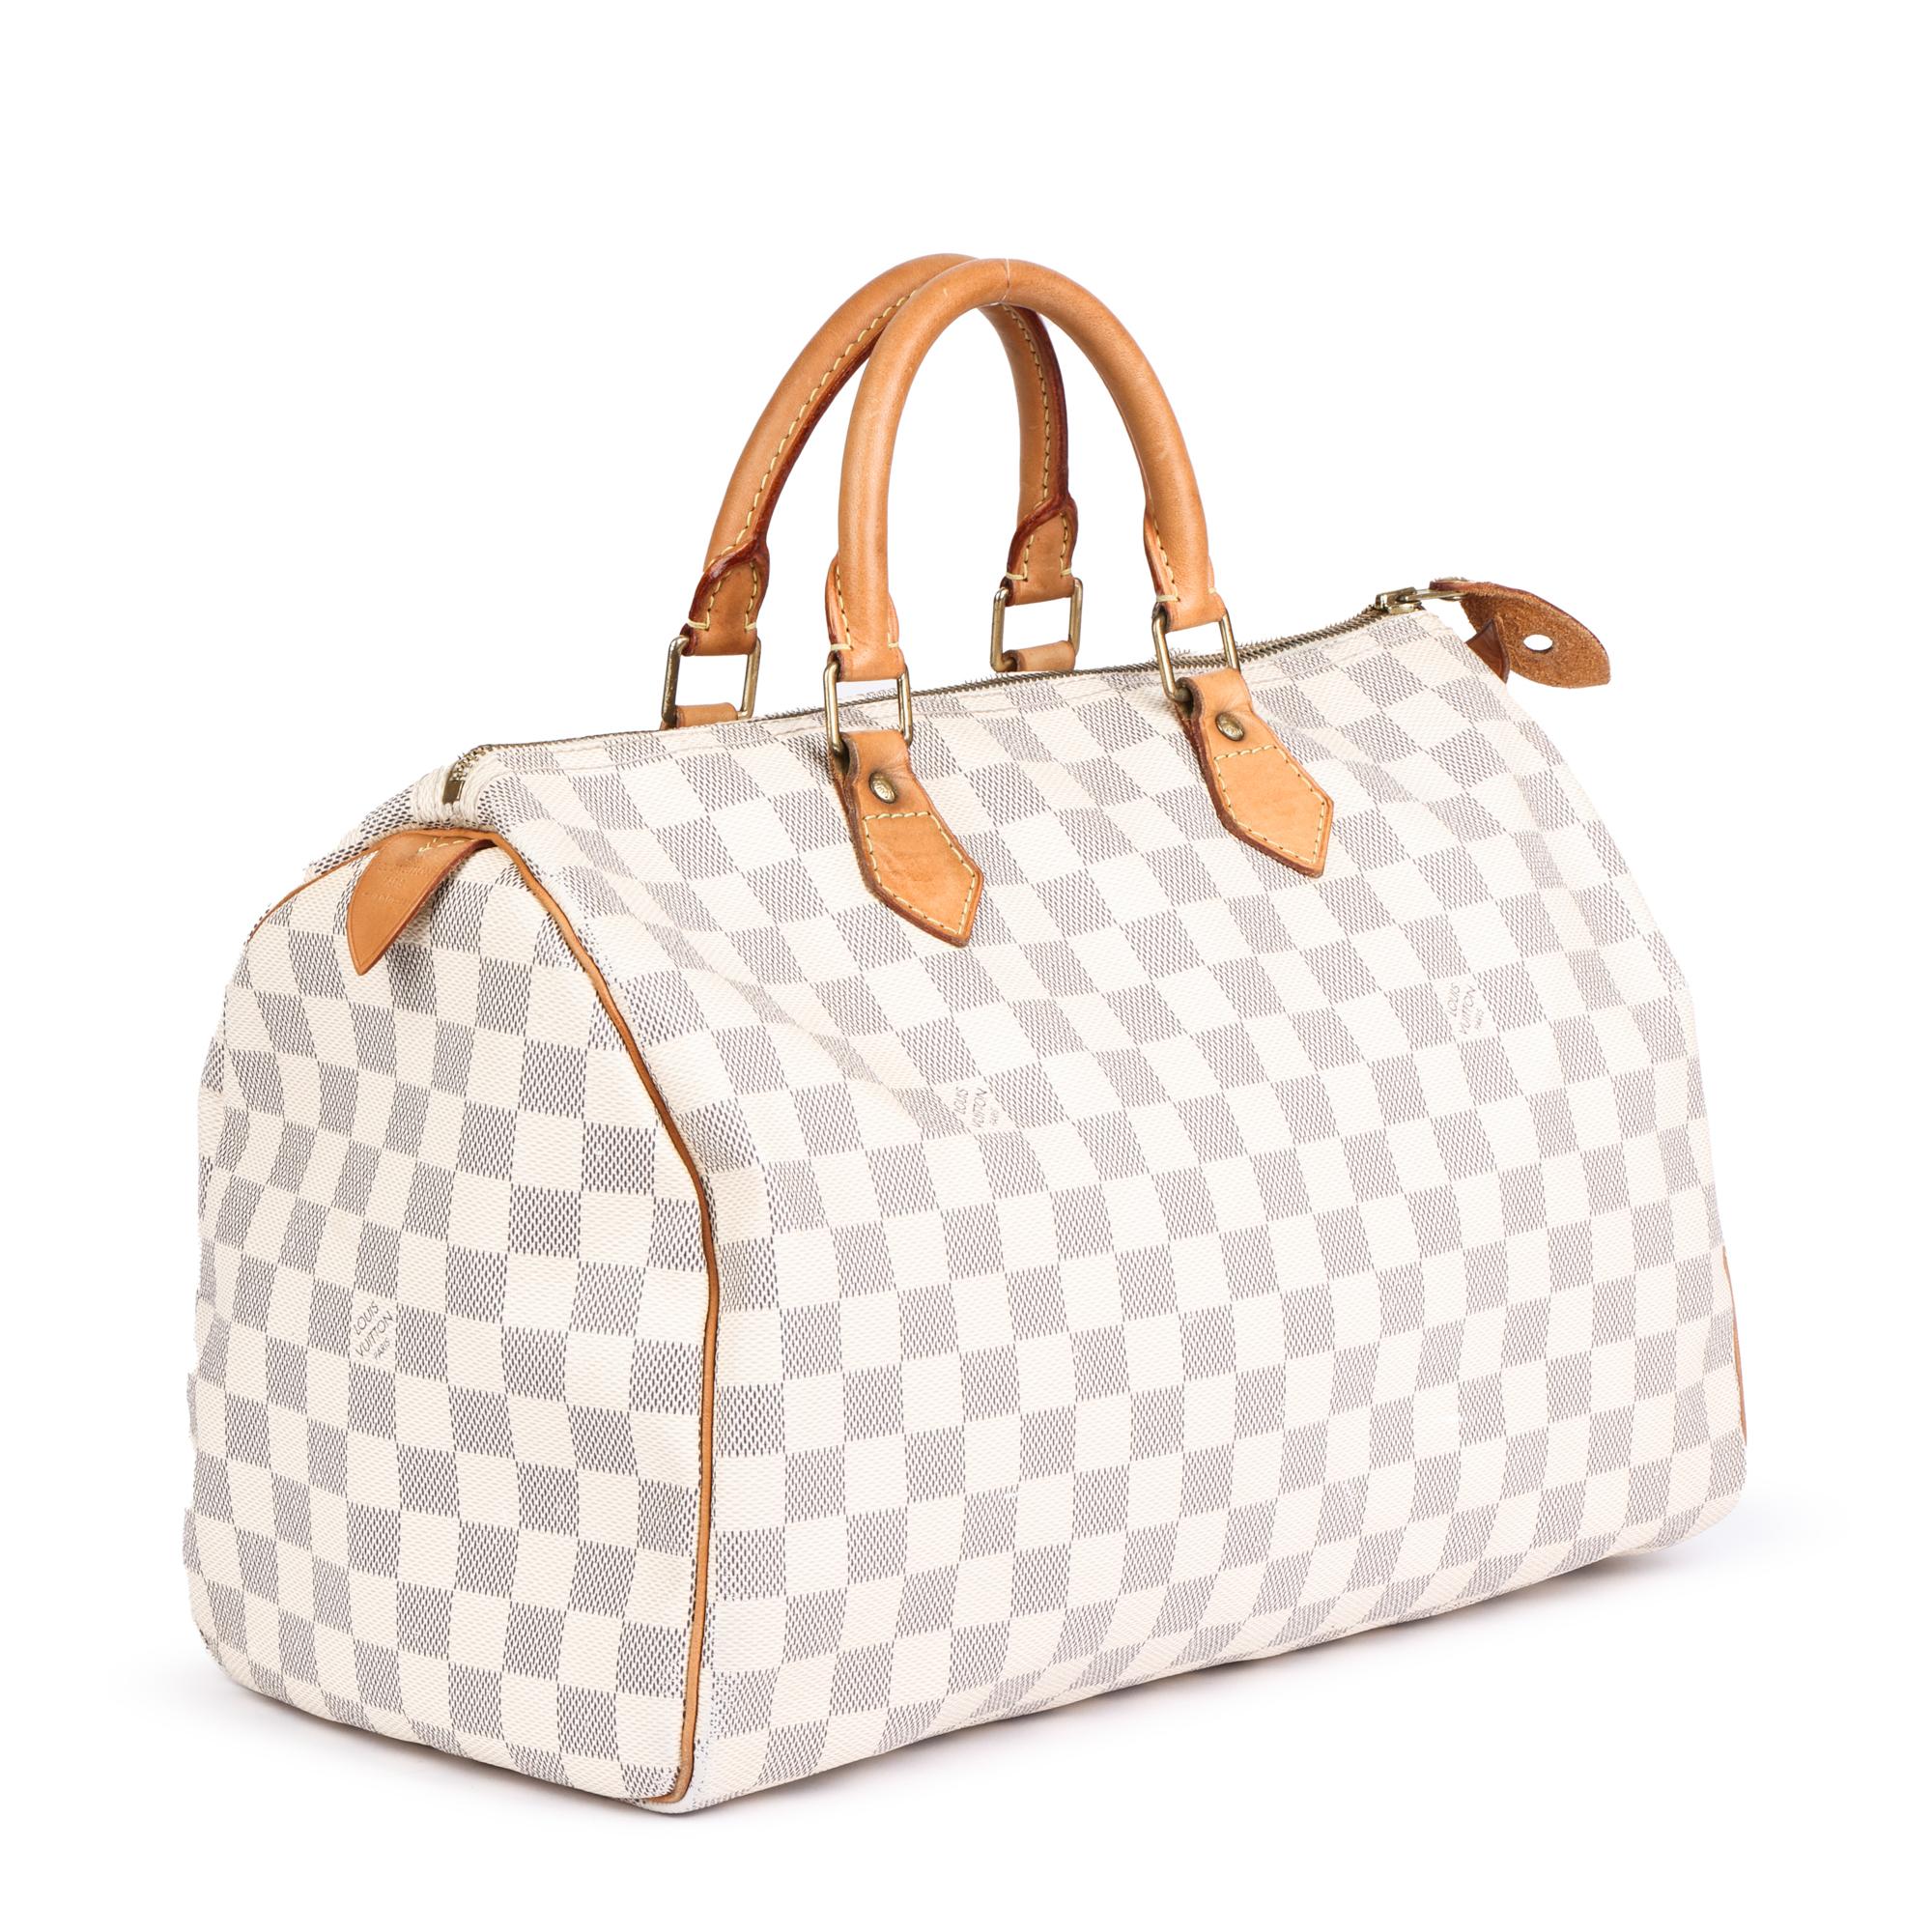 LOUIS VUITTON
Damier Azur Coated Canvas Speedy 35

Xupes Reference: CB645
Serial Number: BA4102
Age (Circa): 2012
Authenticity Details: Date Stamp (Made in France)
Gender: Ladies
Type: Tote

Colour: Beige
Hardware: Golden Brass
Material(s): Coated